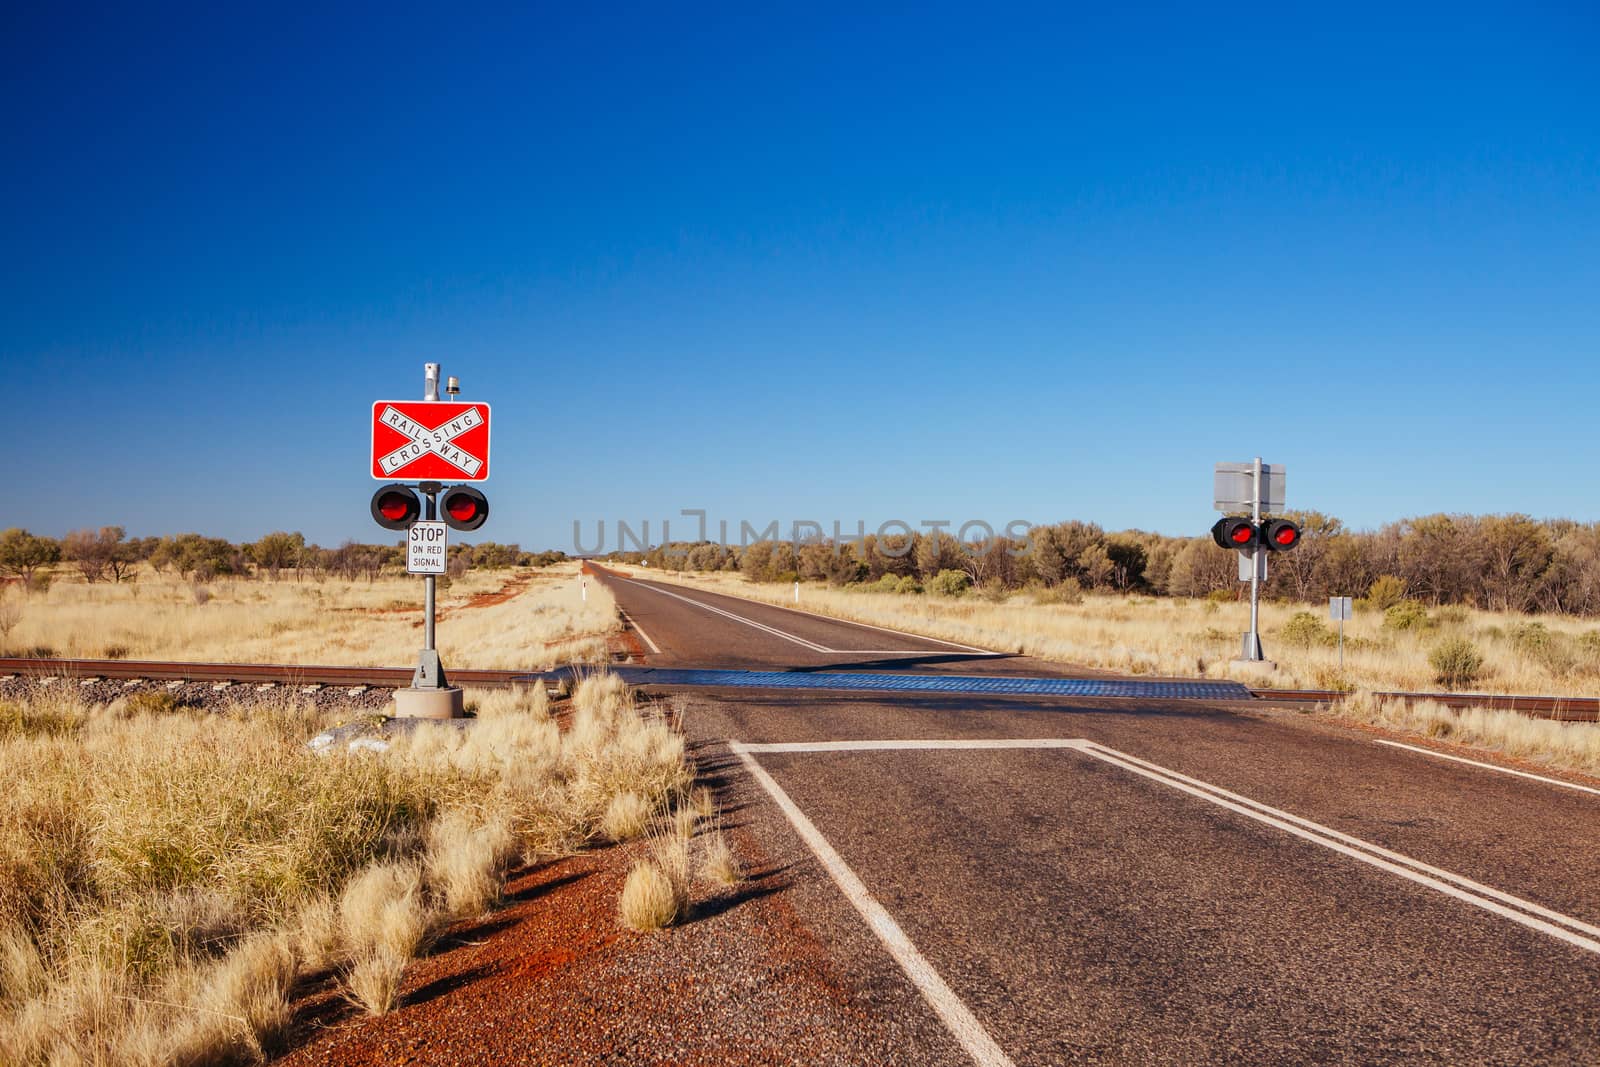 The famous Ghan railway track and crossing with warnings near Alice Springs extends all the way to Darwin in Northern Territory, Australia